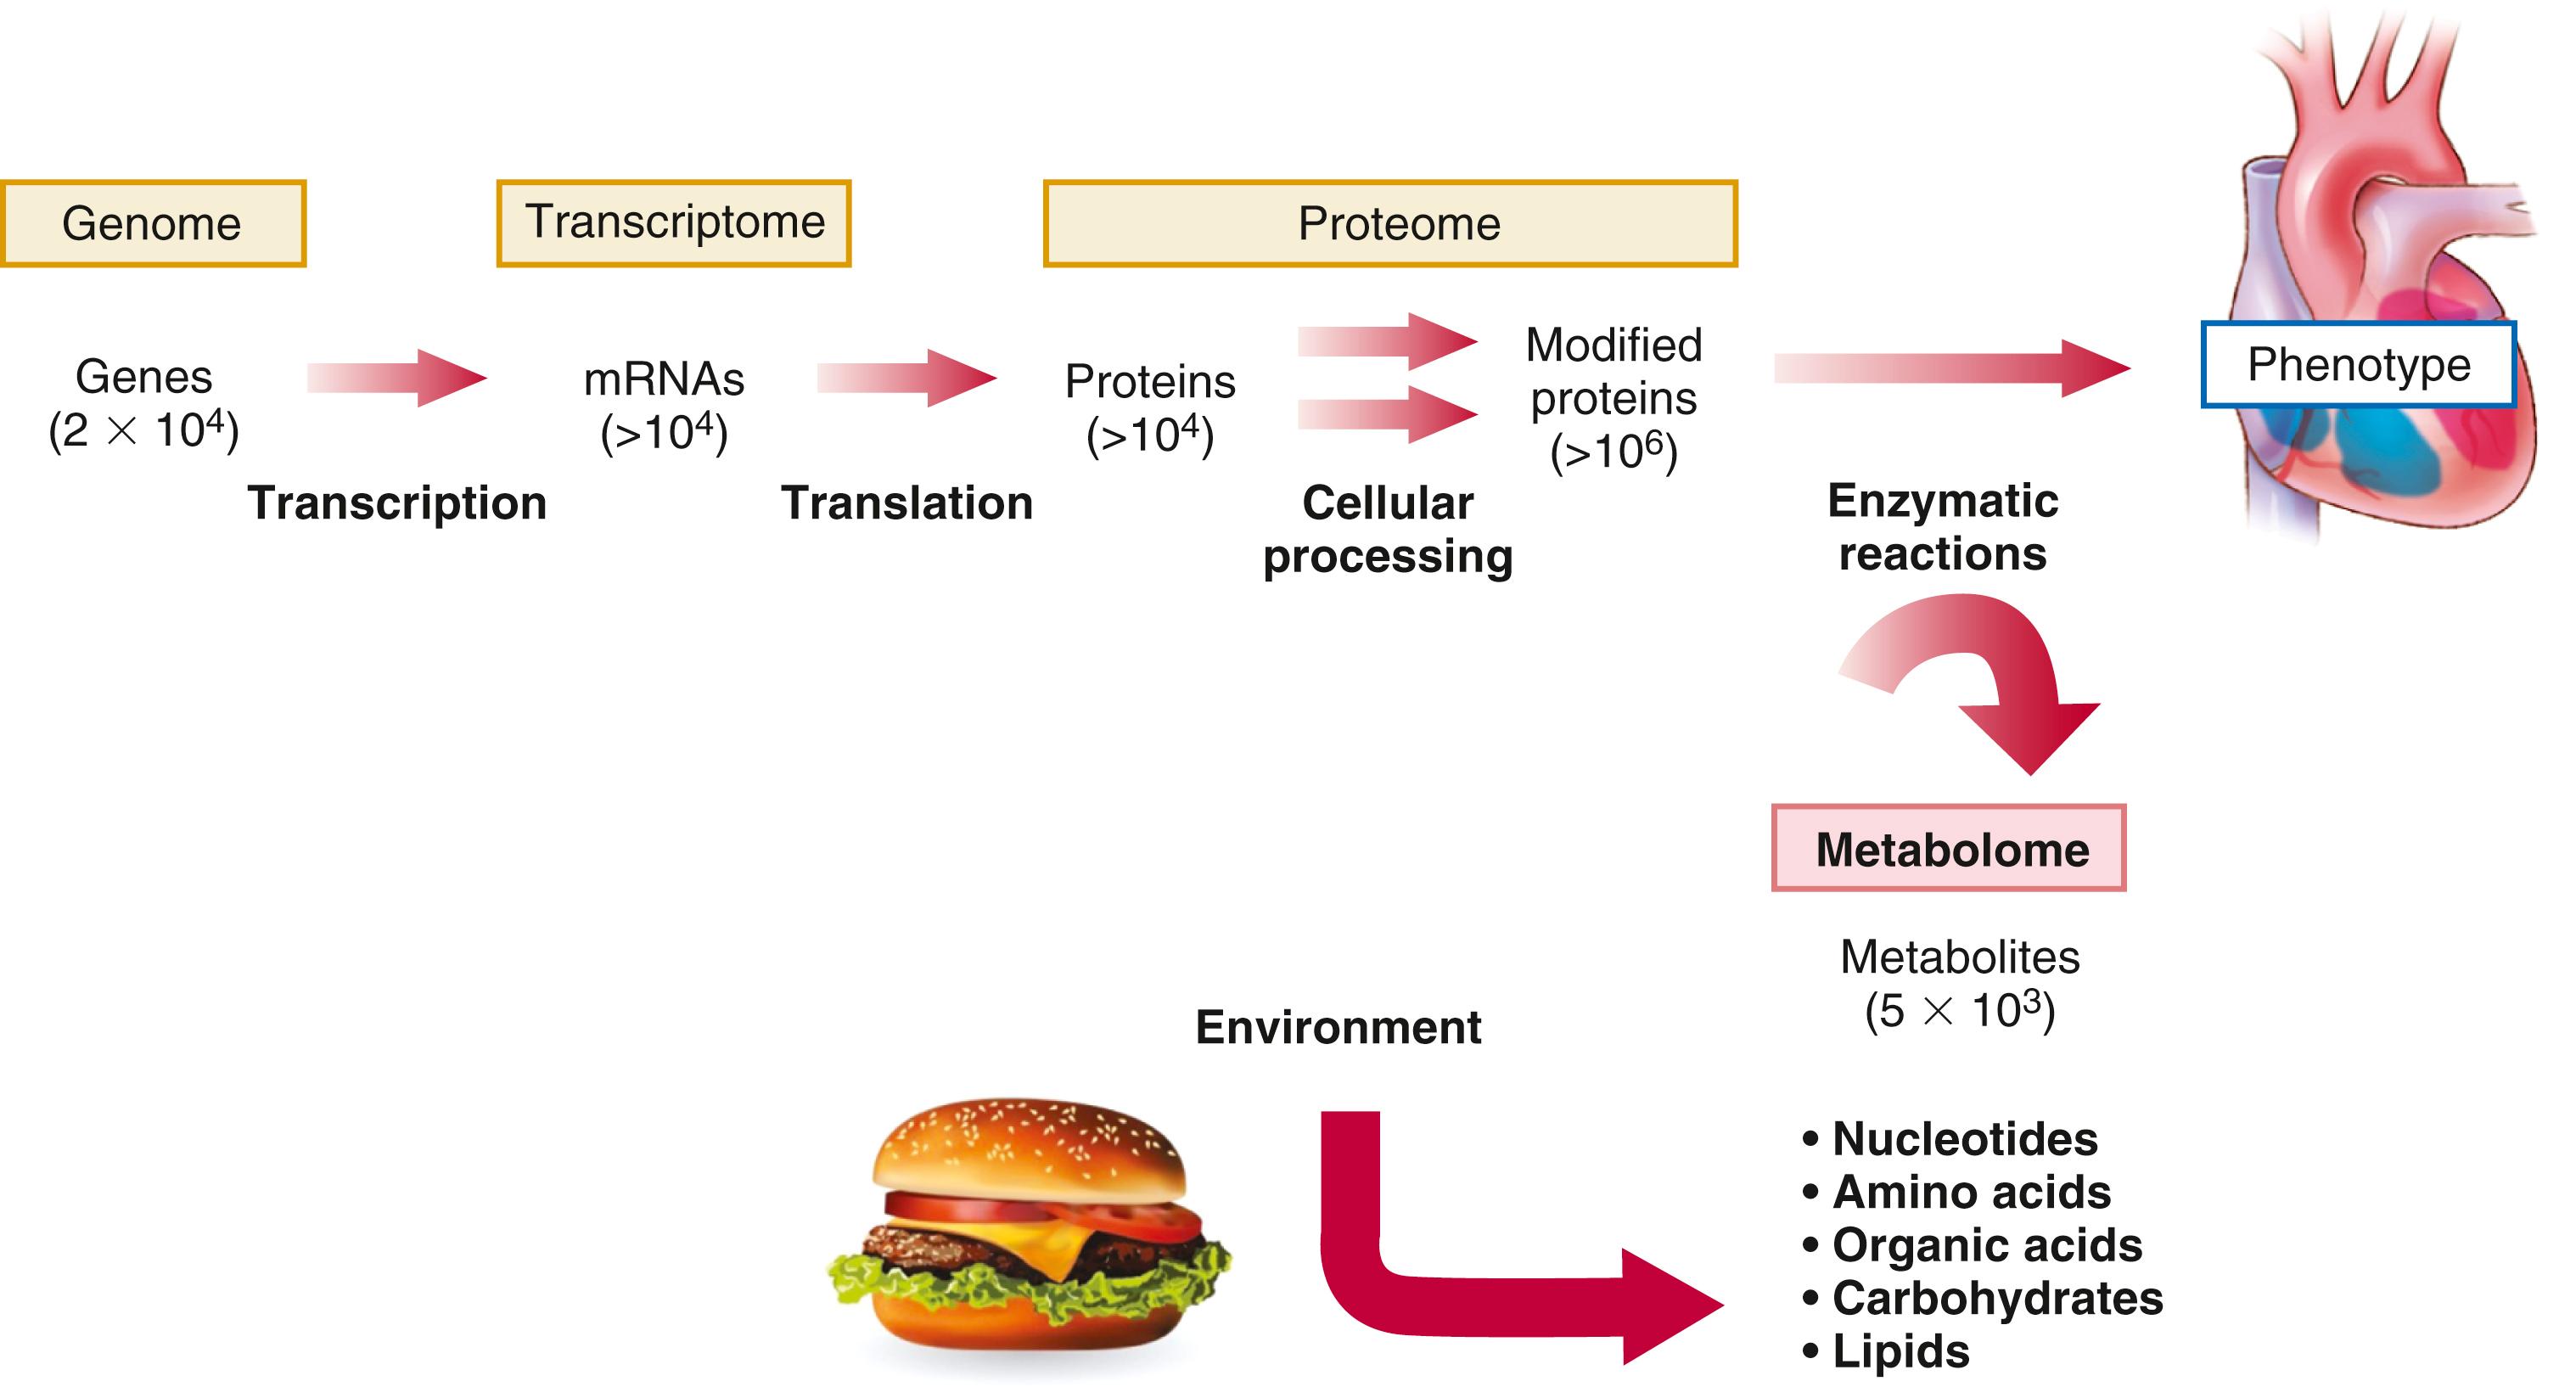 FigURE 8.1, The conceptual relationship of the genome, transcriptome, proteome, and metabolome. Informational complexity increases from genome to transcriptome to proteome. The estimated number of entities of each type of molecule in humans is indicated in parentheses.